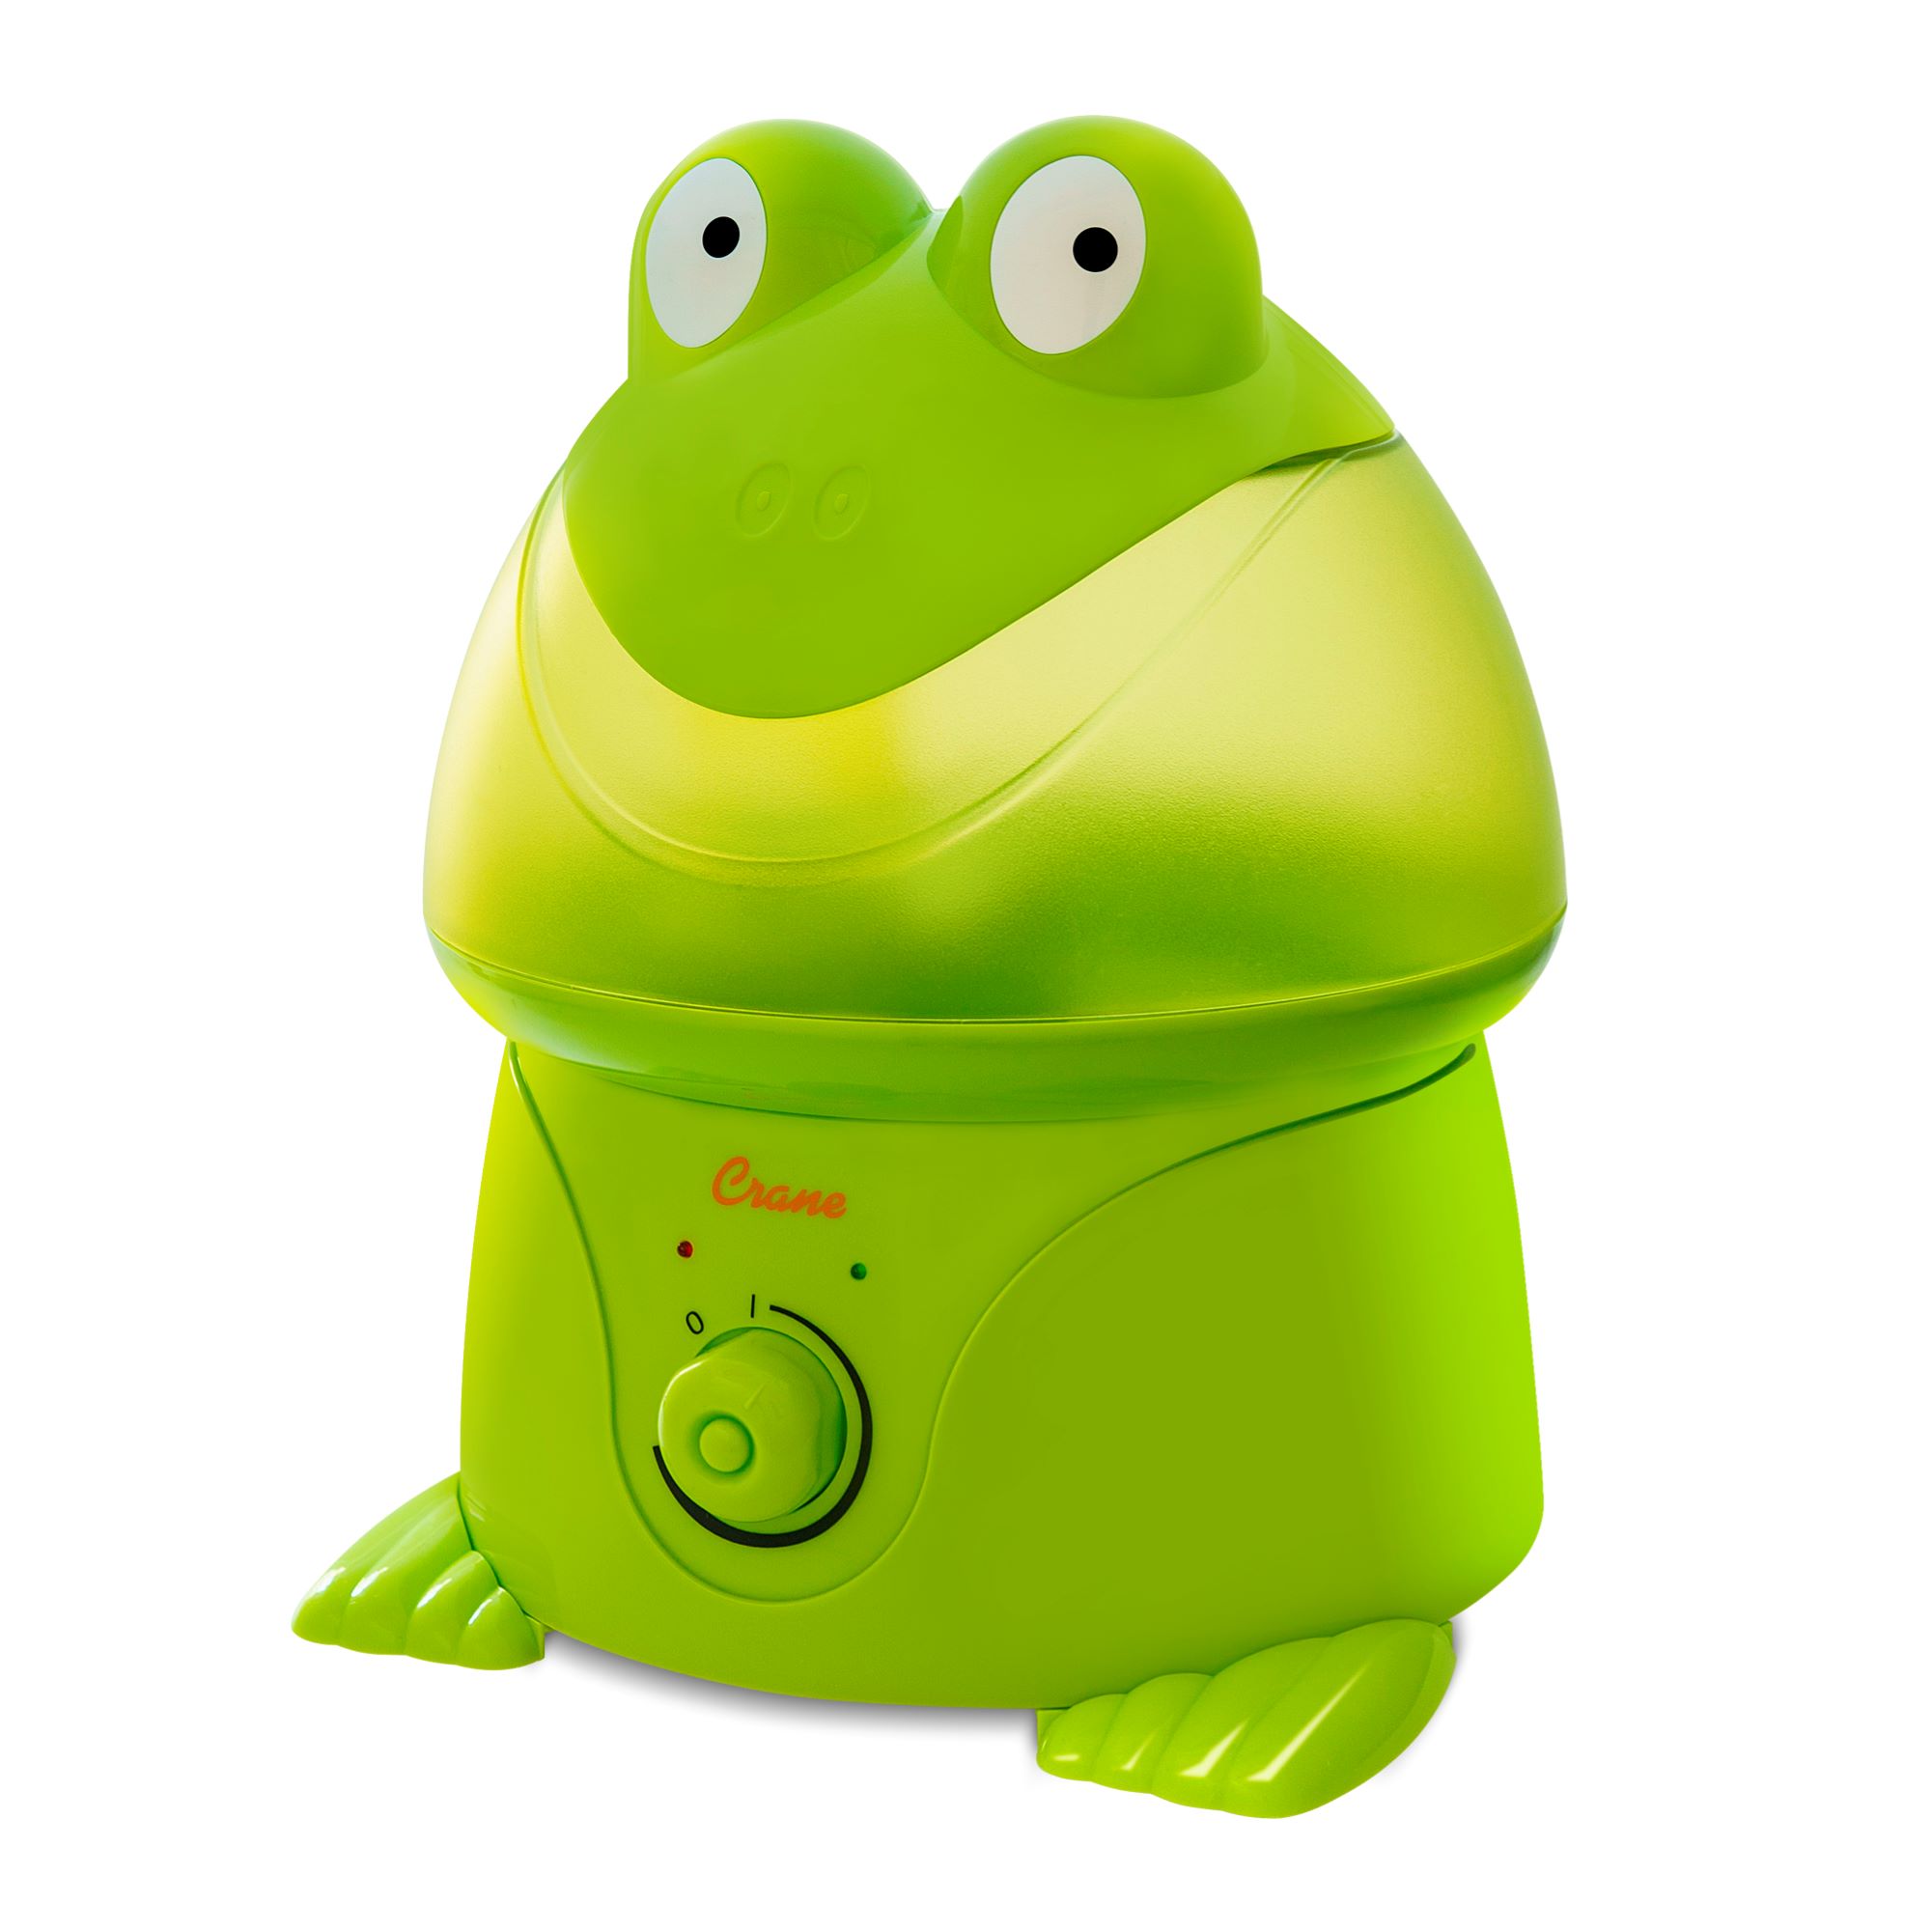 Crane USA Adorable Ultrasonic Cool Mist Humidifier, 1 Gallon, 500 Sq Ft Coverage, 24 Hour Run Time - Frog - image 1 of 7